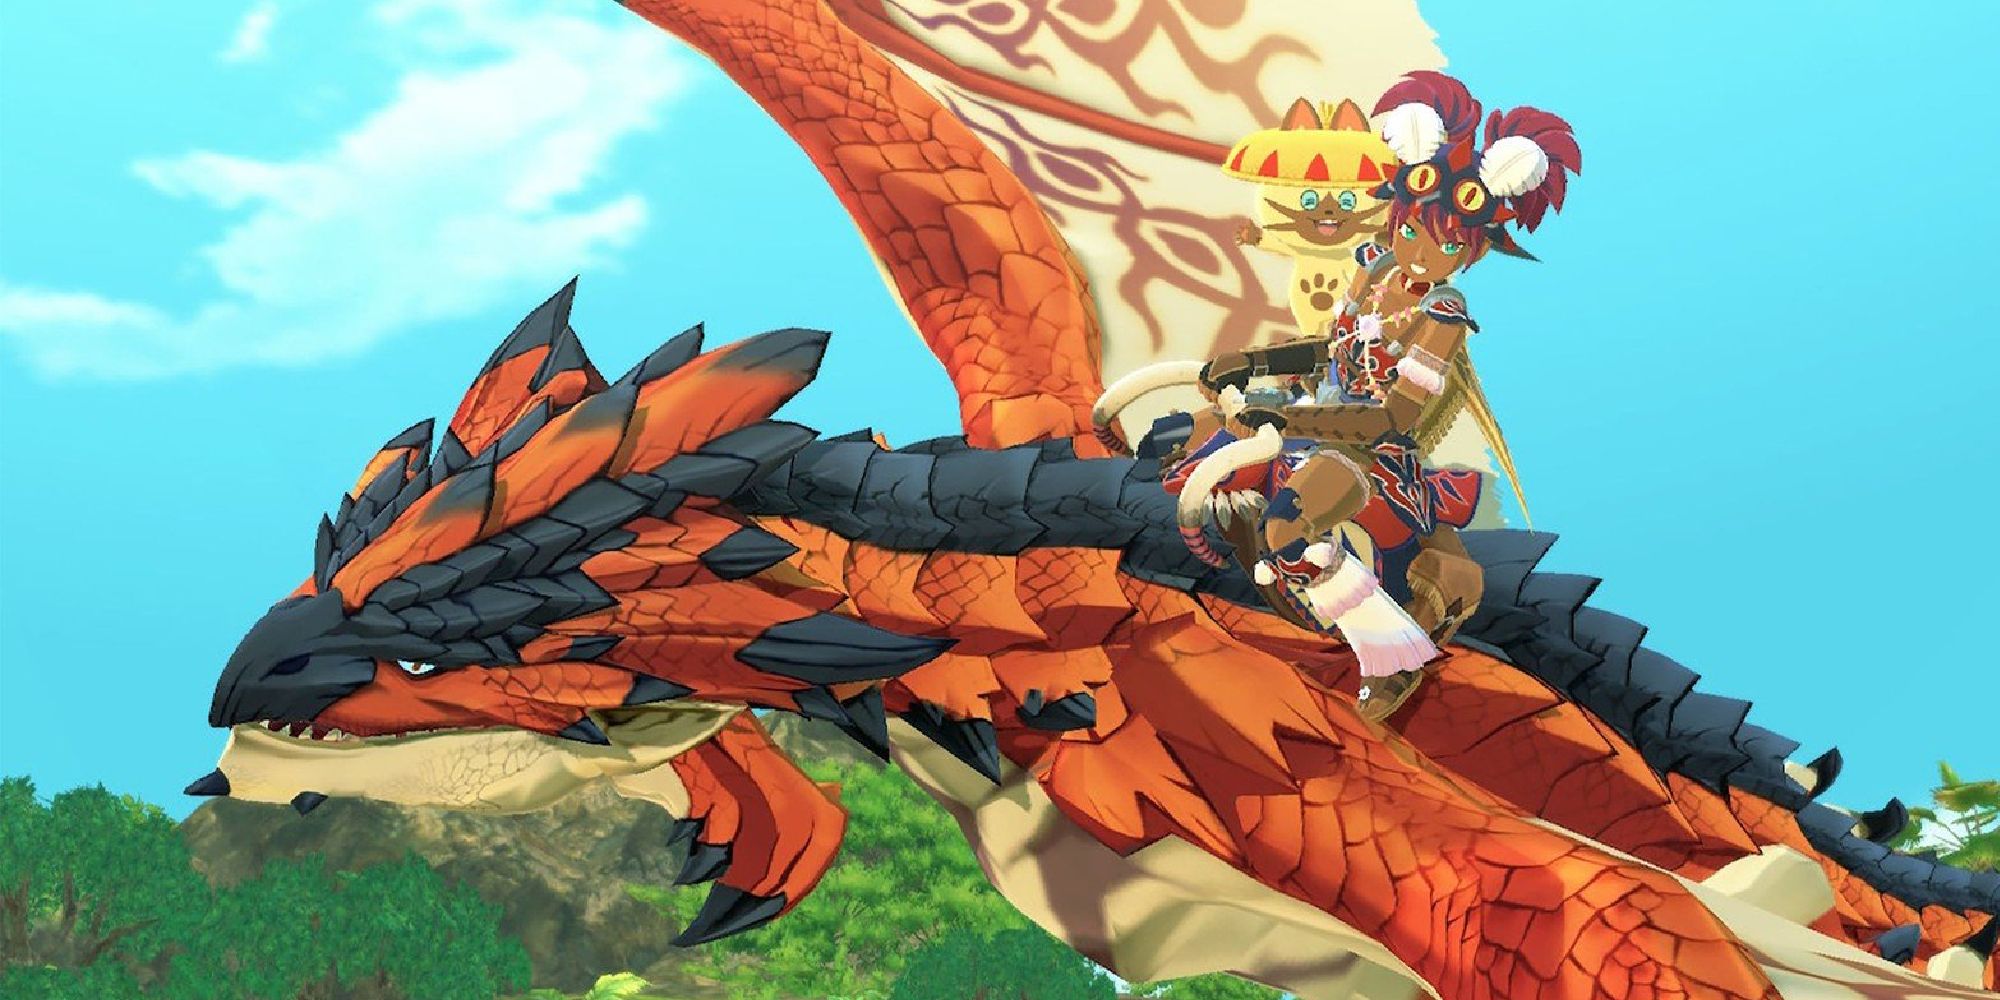 A Hunter flying on the back of a Rathalos in Monster Hunter Stories 2